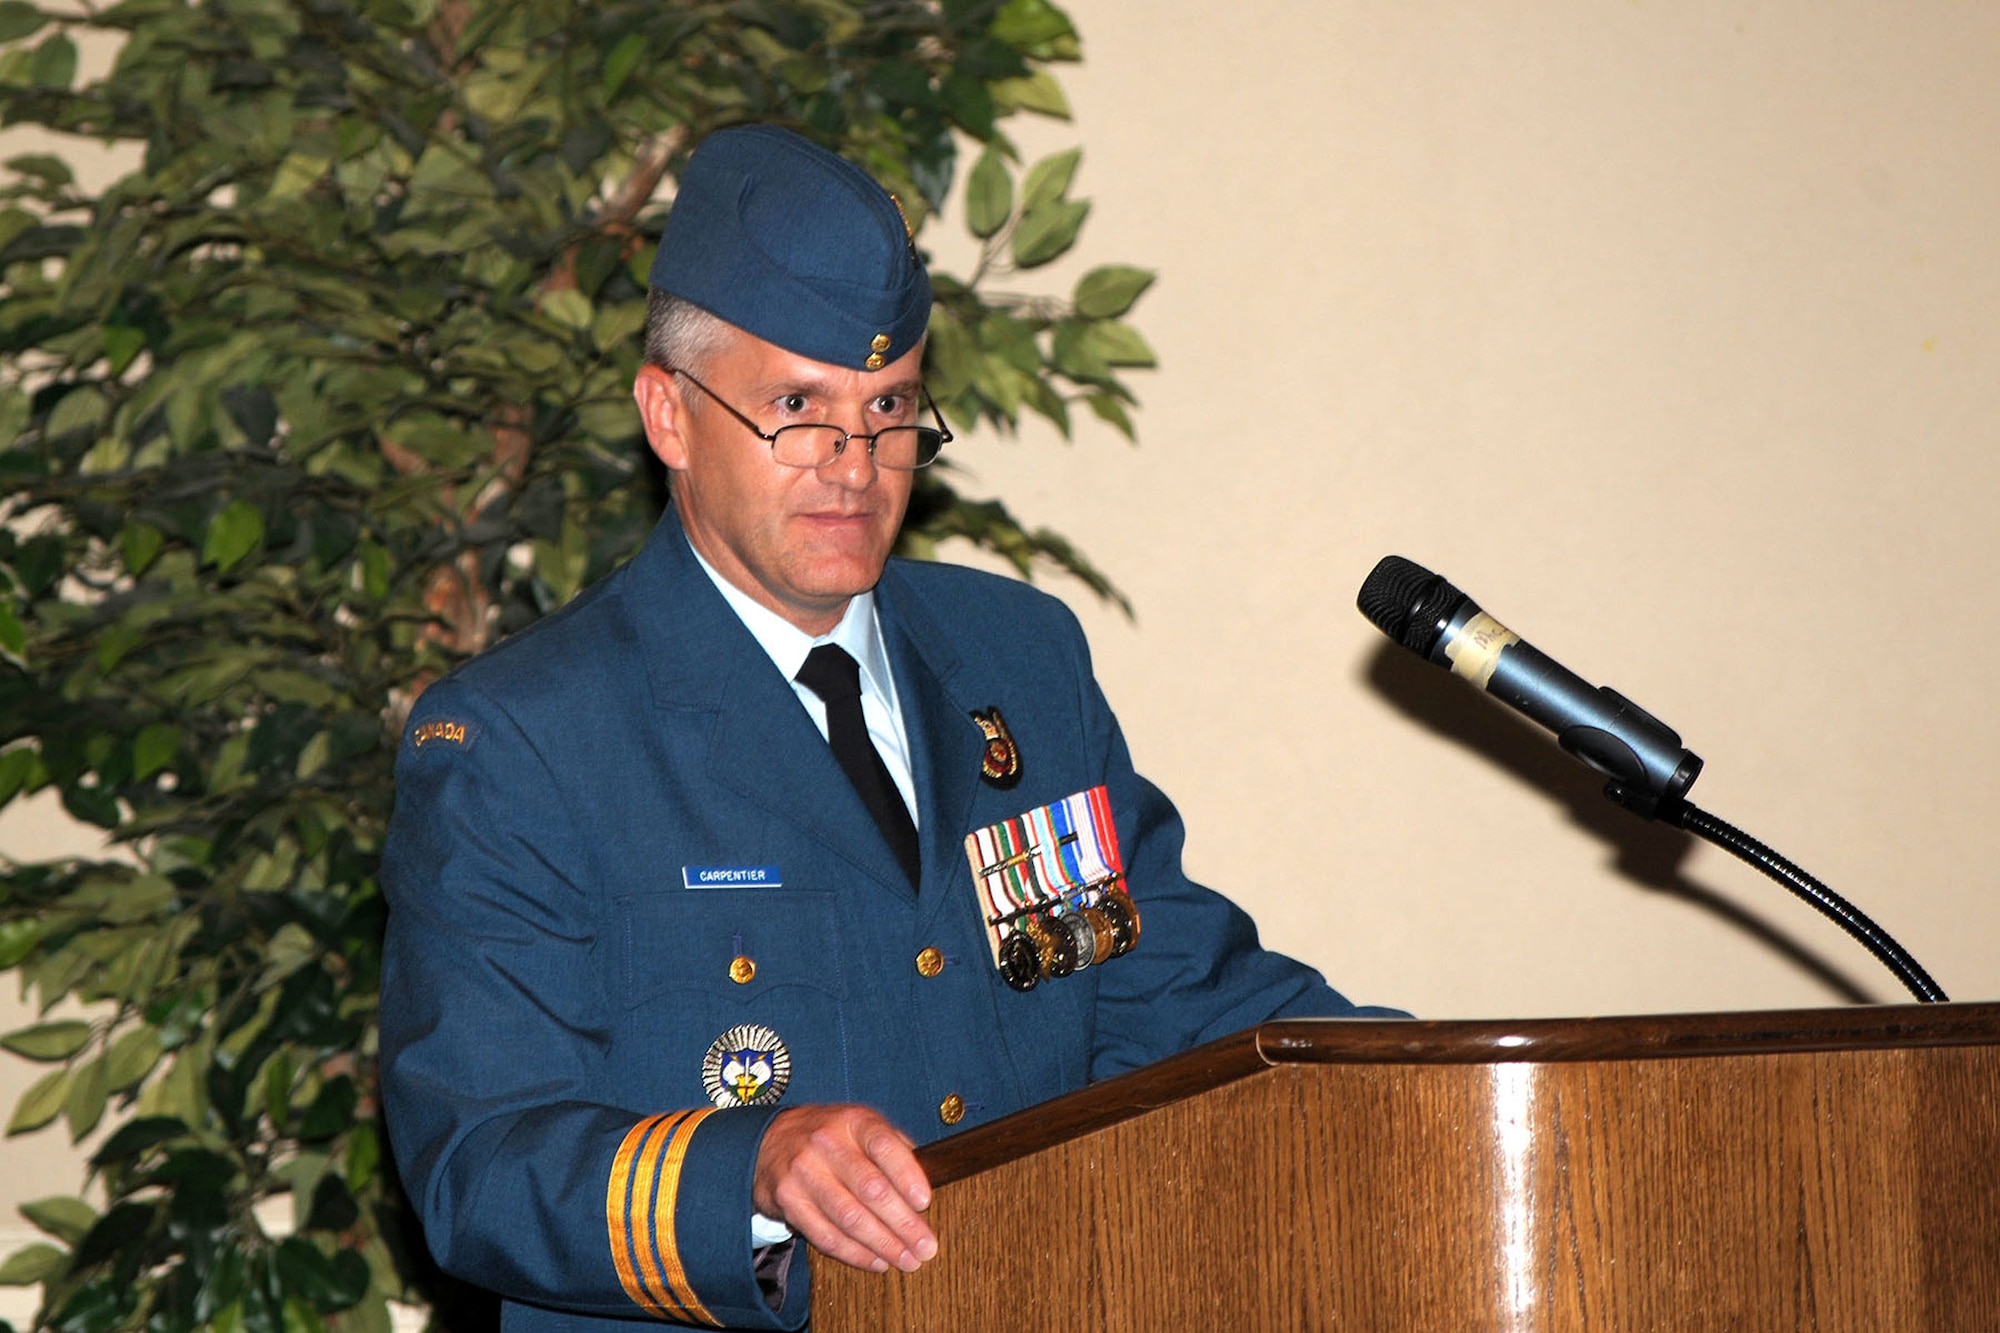 Lt. Col. Patrick Carpentier took command of the 552nd Air Control Wing Canadian Component during a ceremony here recently. Colonel Carpentier comes from commanding the 12th Radar Squadron, tactical mobile radar. (Air Force photo by Megan Davis)